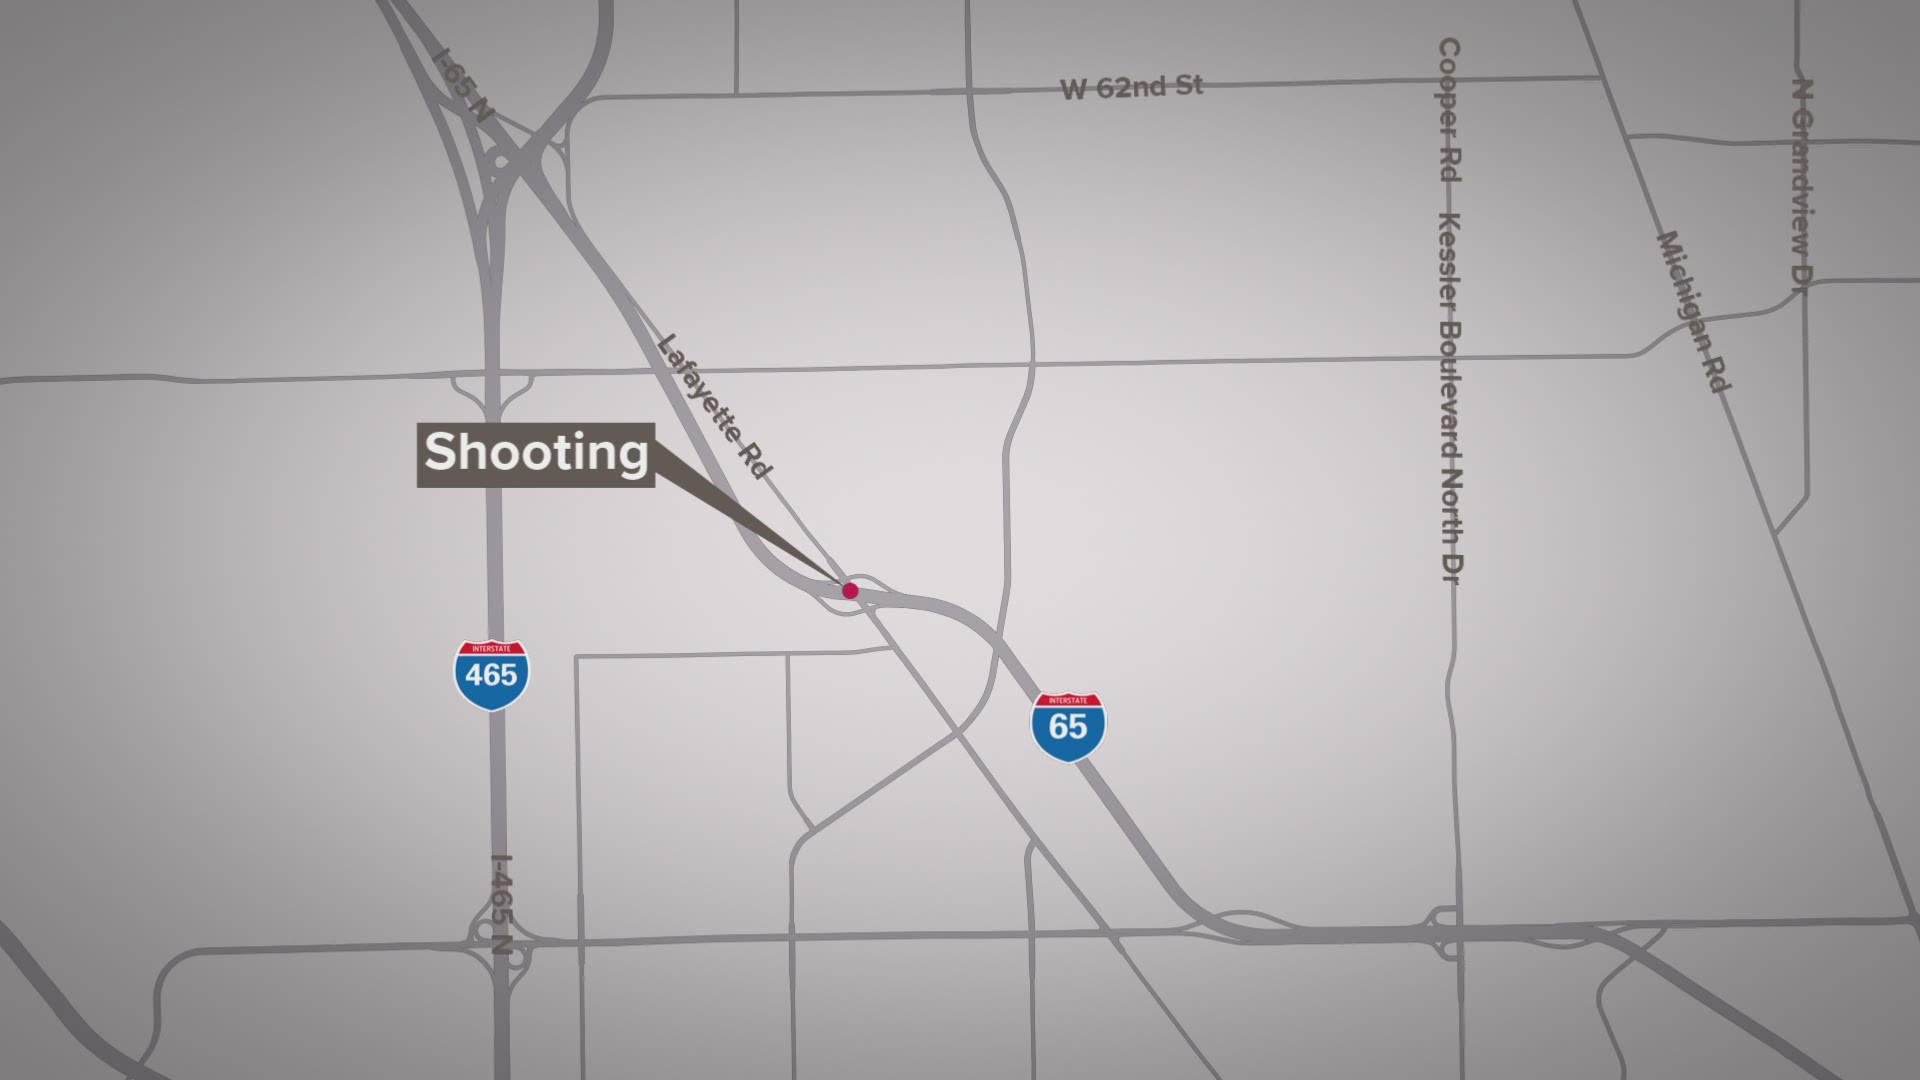 Initial investigation by IMPD determined that the shooting happened on I-65 near Lafayette Road.